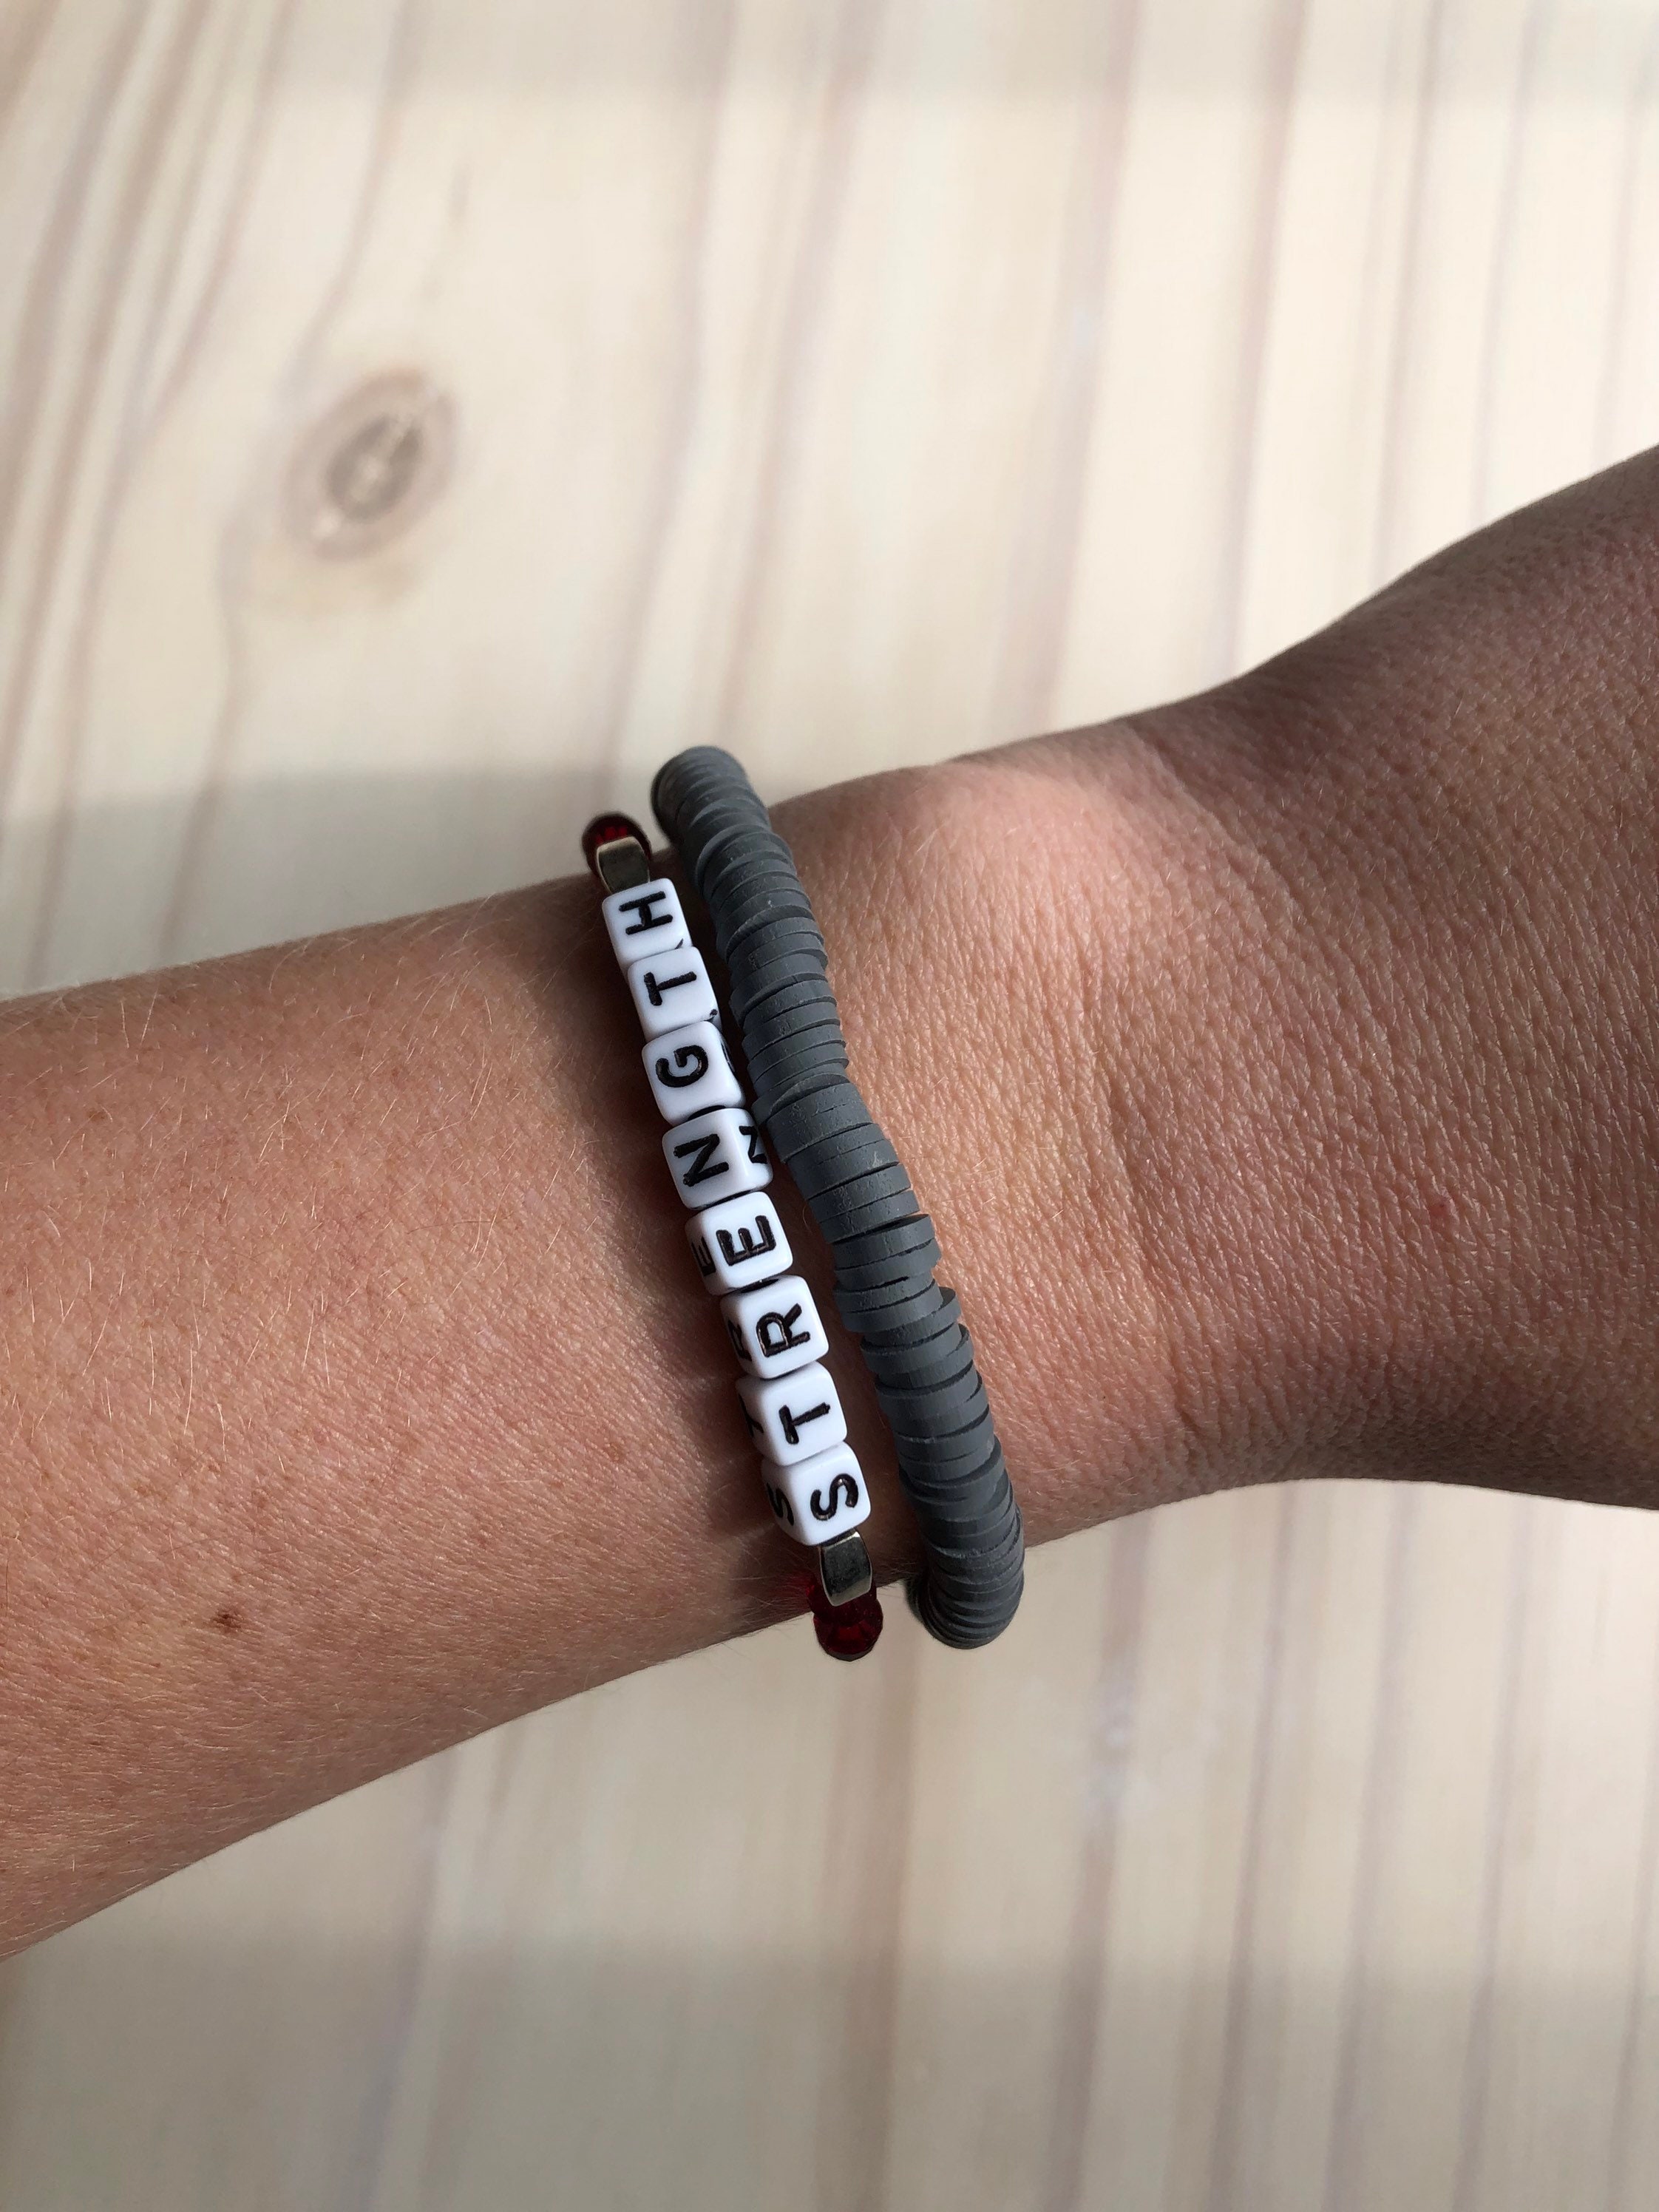 Clarity & Decision-Making Bracelet, Daily Affirmations